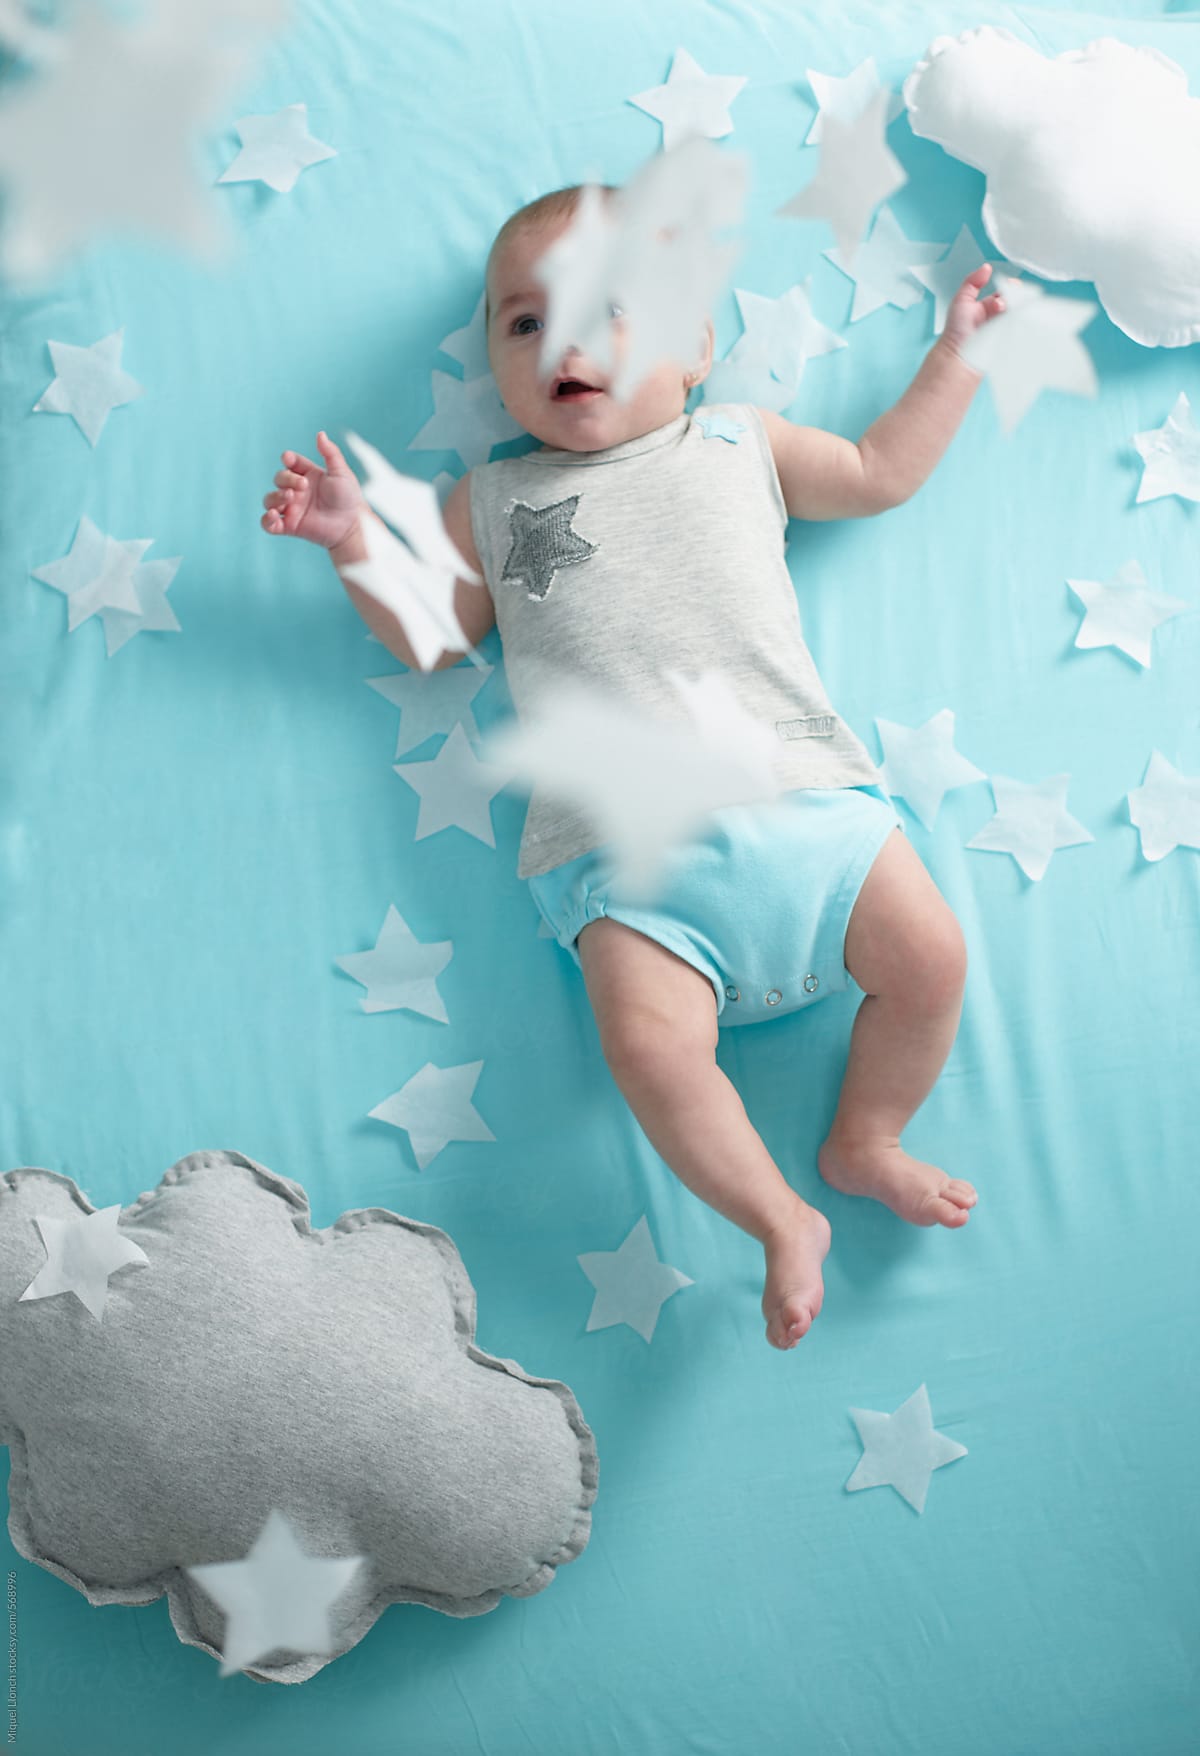 Baby playing with crafted stars and clouds